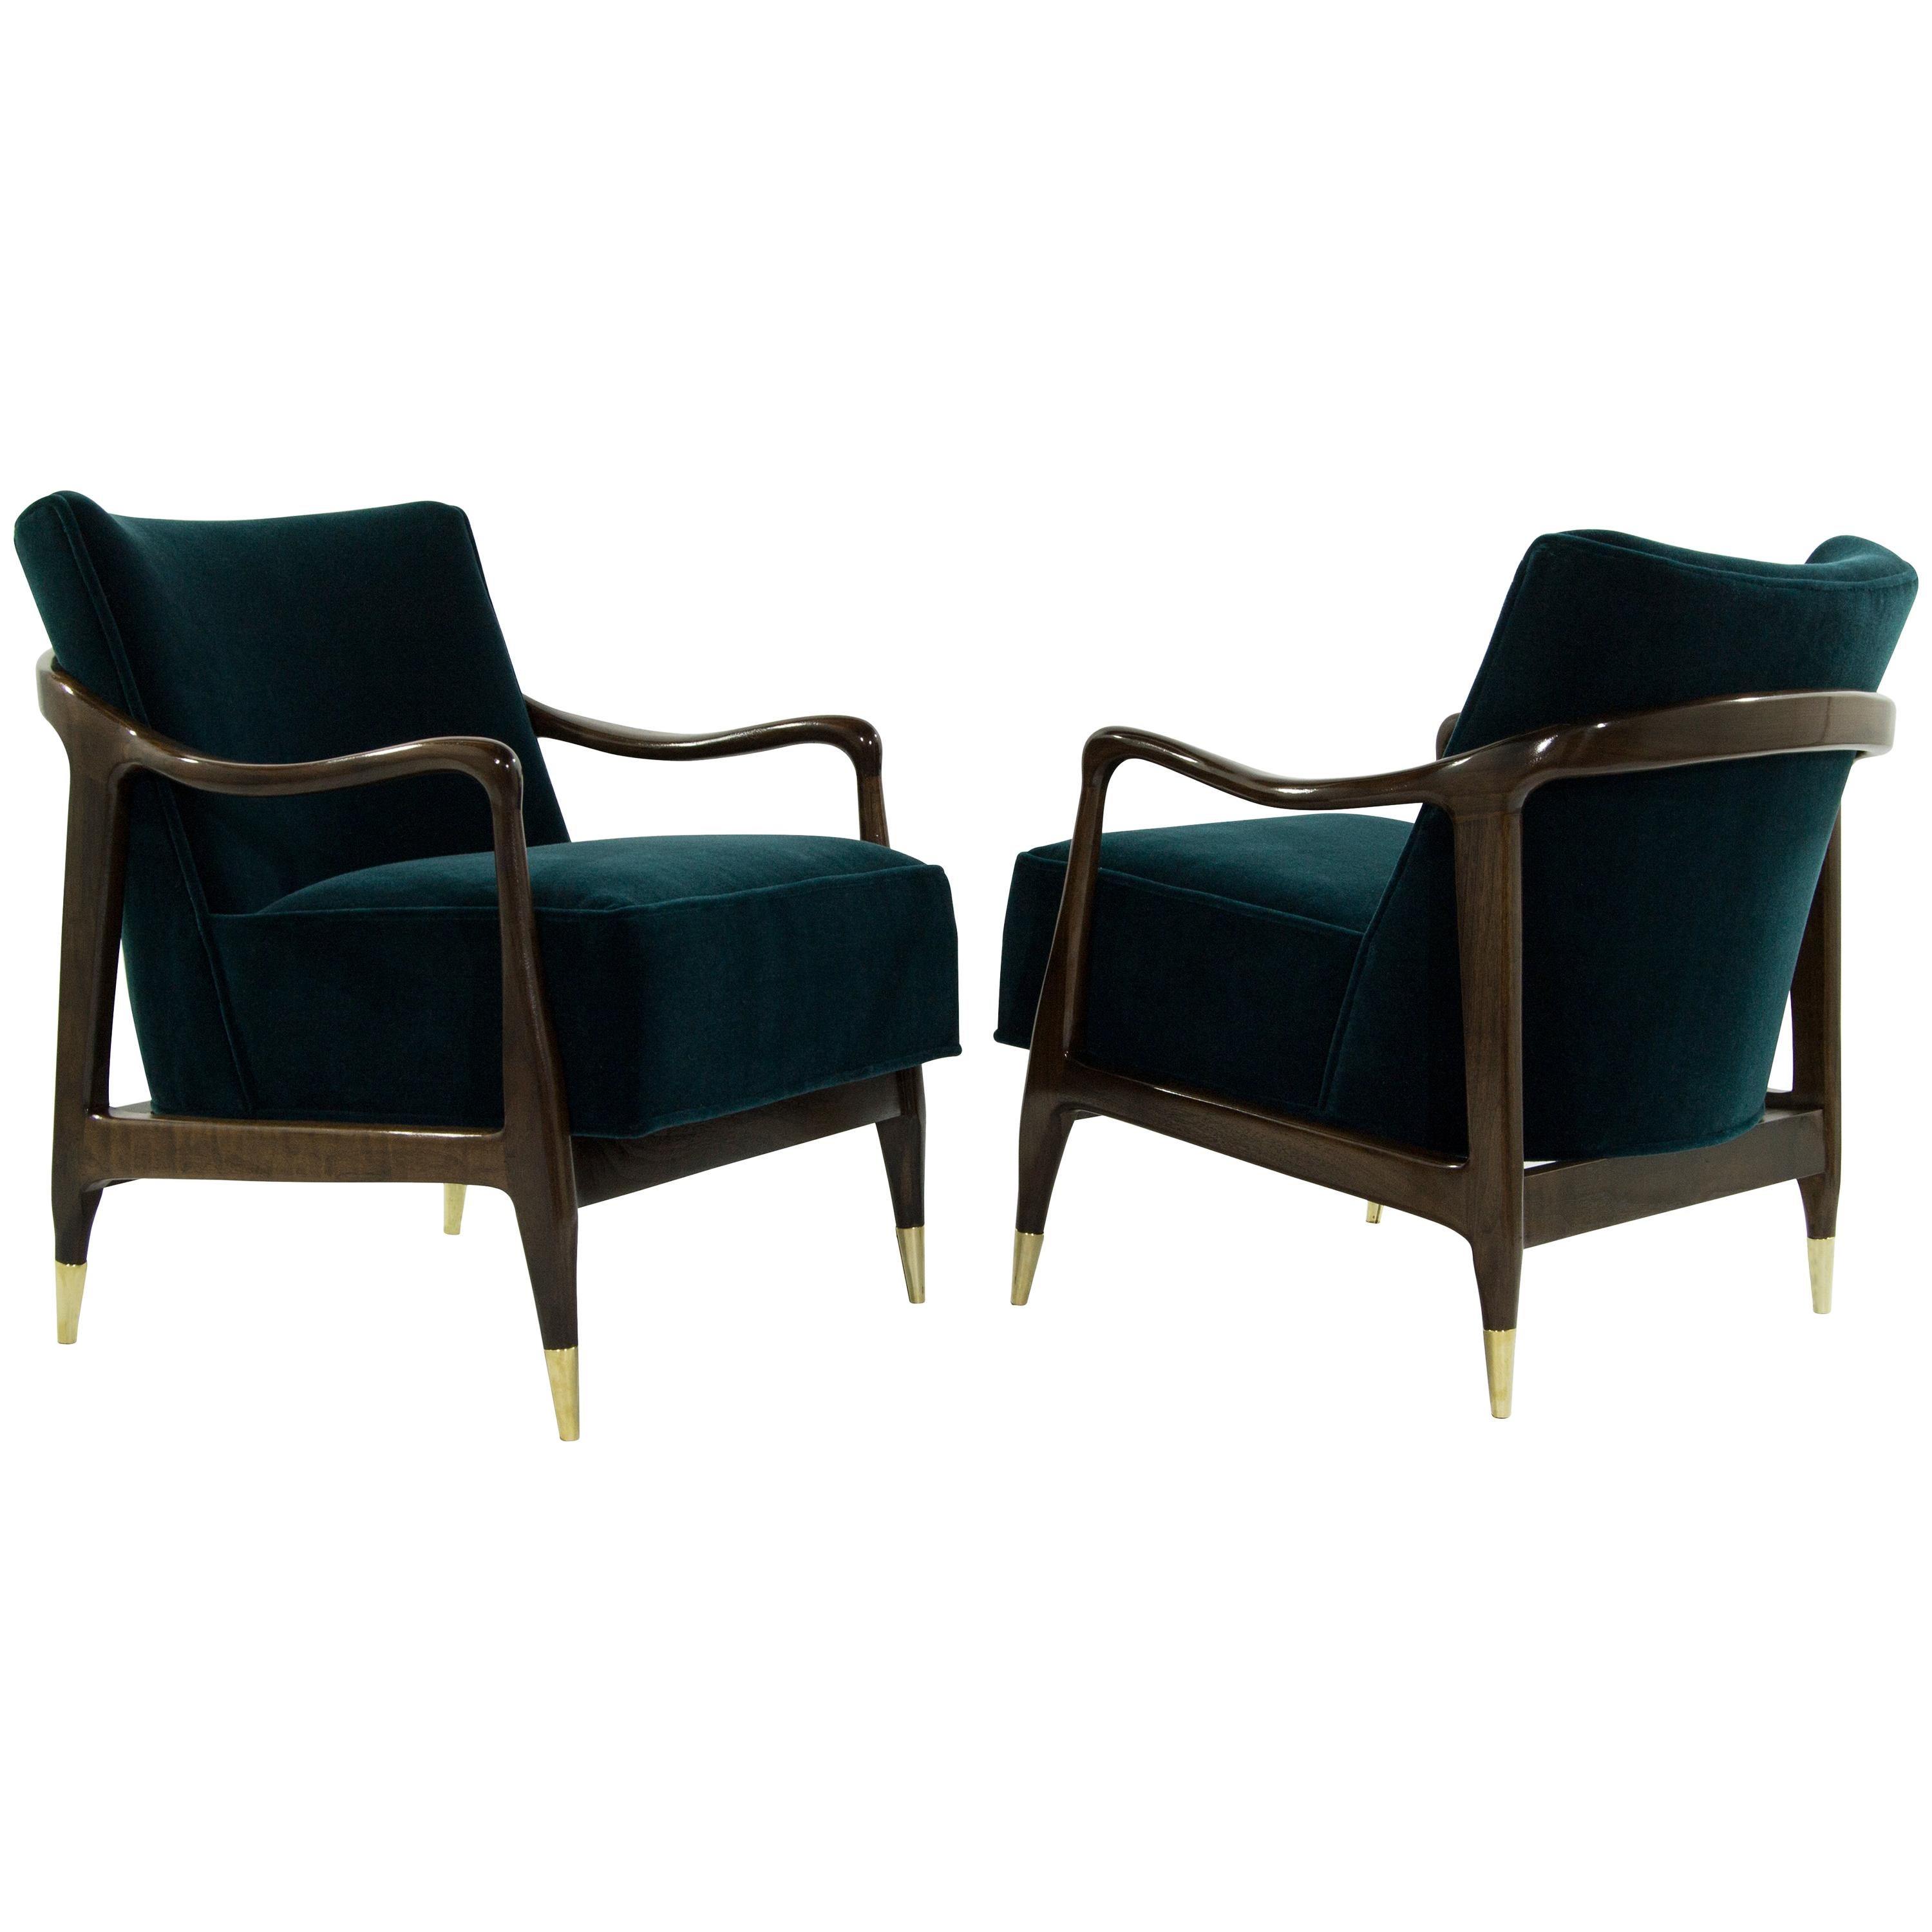 Midcentury Sculptural Gio Ponti Style Walnut Lounge Chairs, 1950s